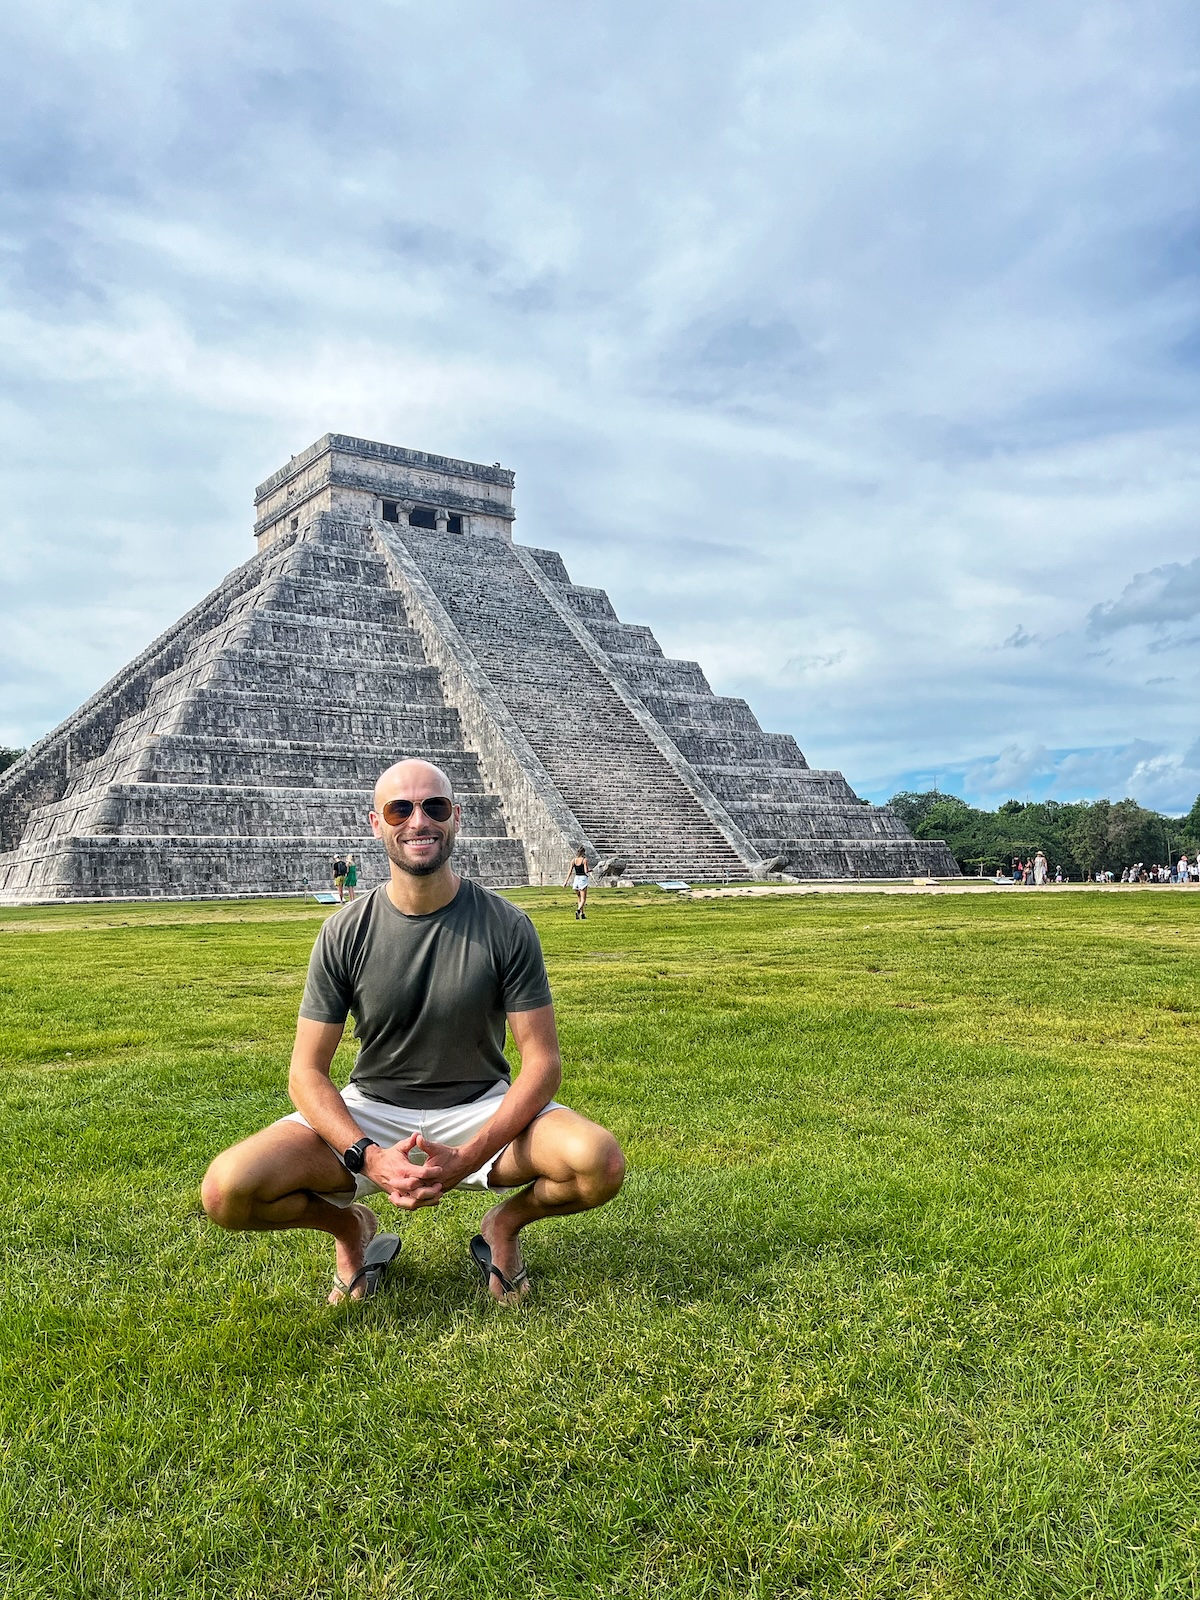 A tourist crouches down in front of Chichen Itza, one of the most famous landmarks in Mexico